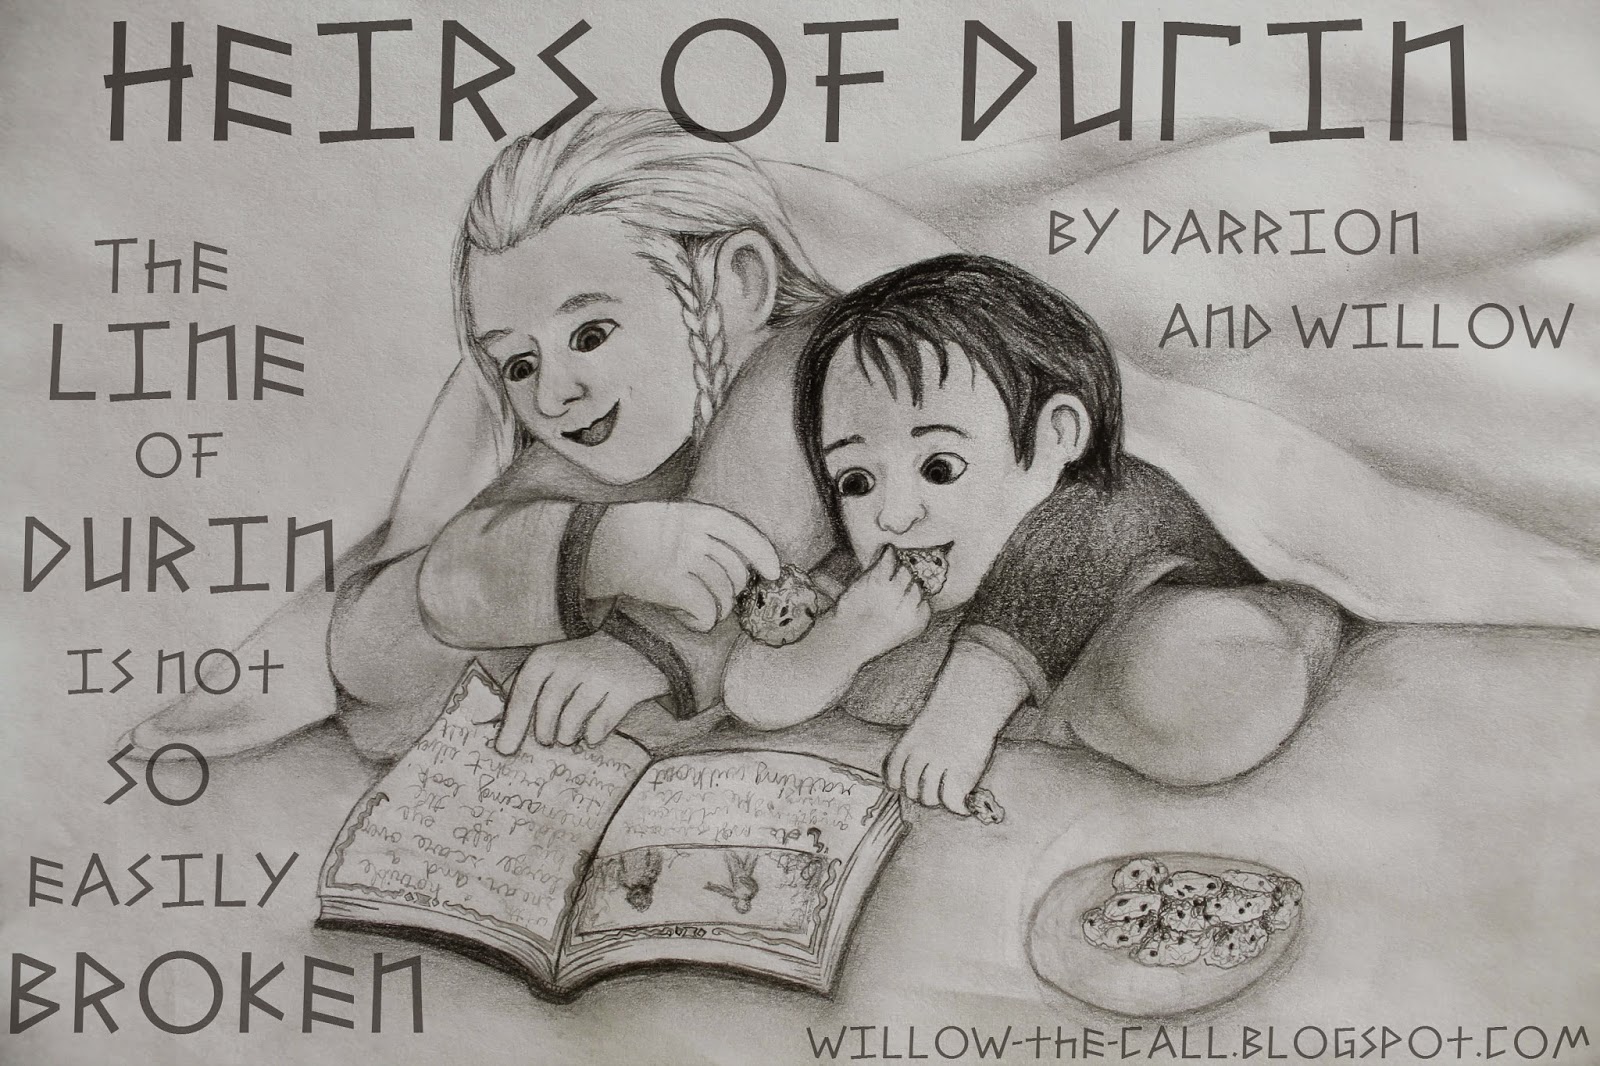 Read Willow and Darrion's Book, Heirs of Durin